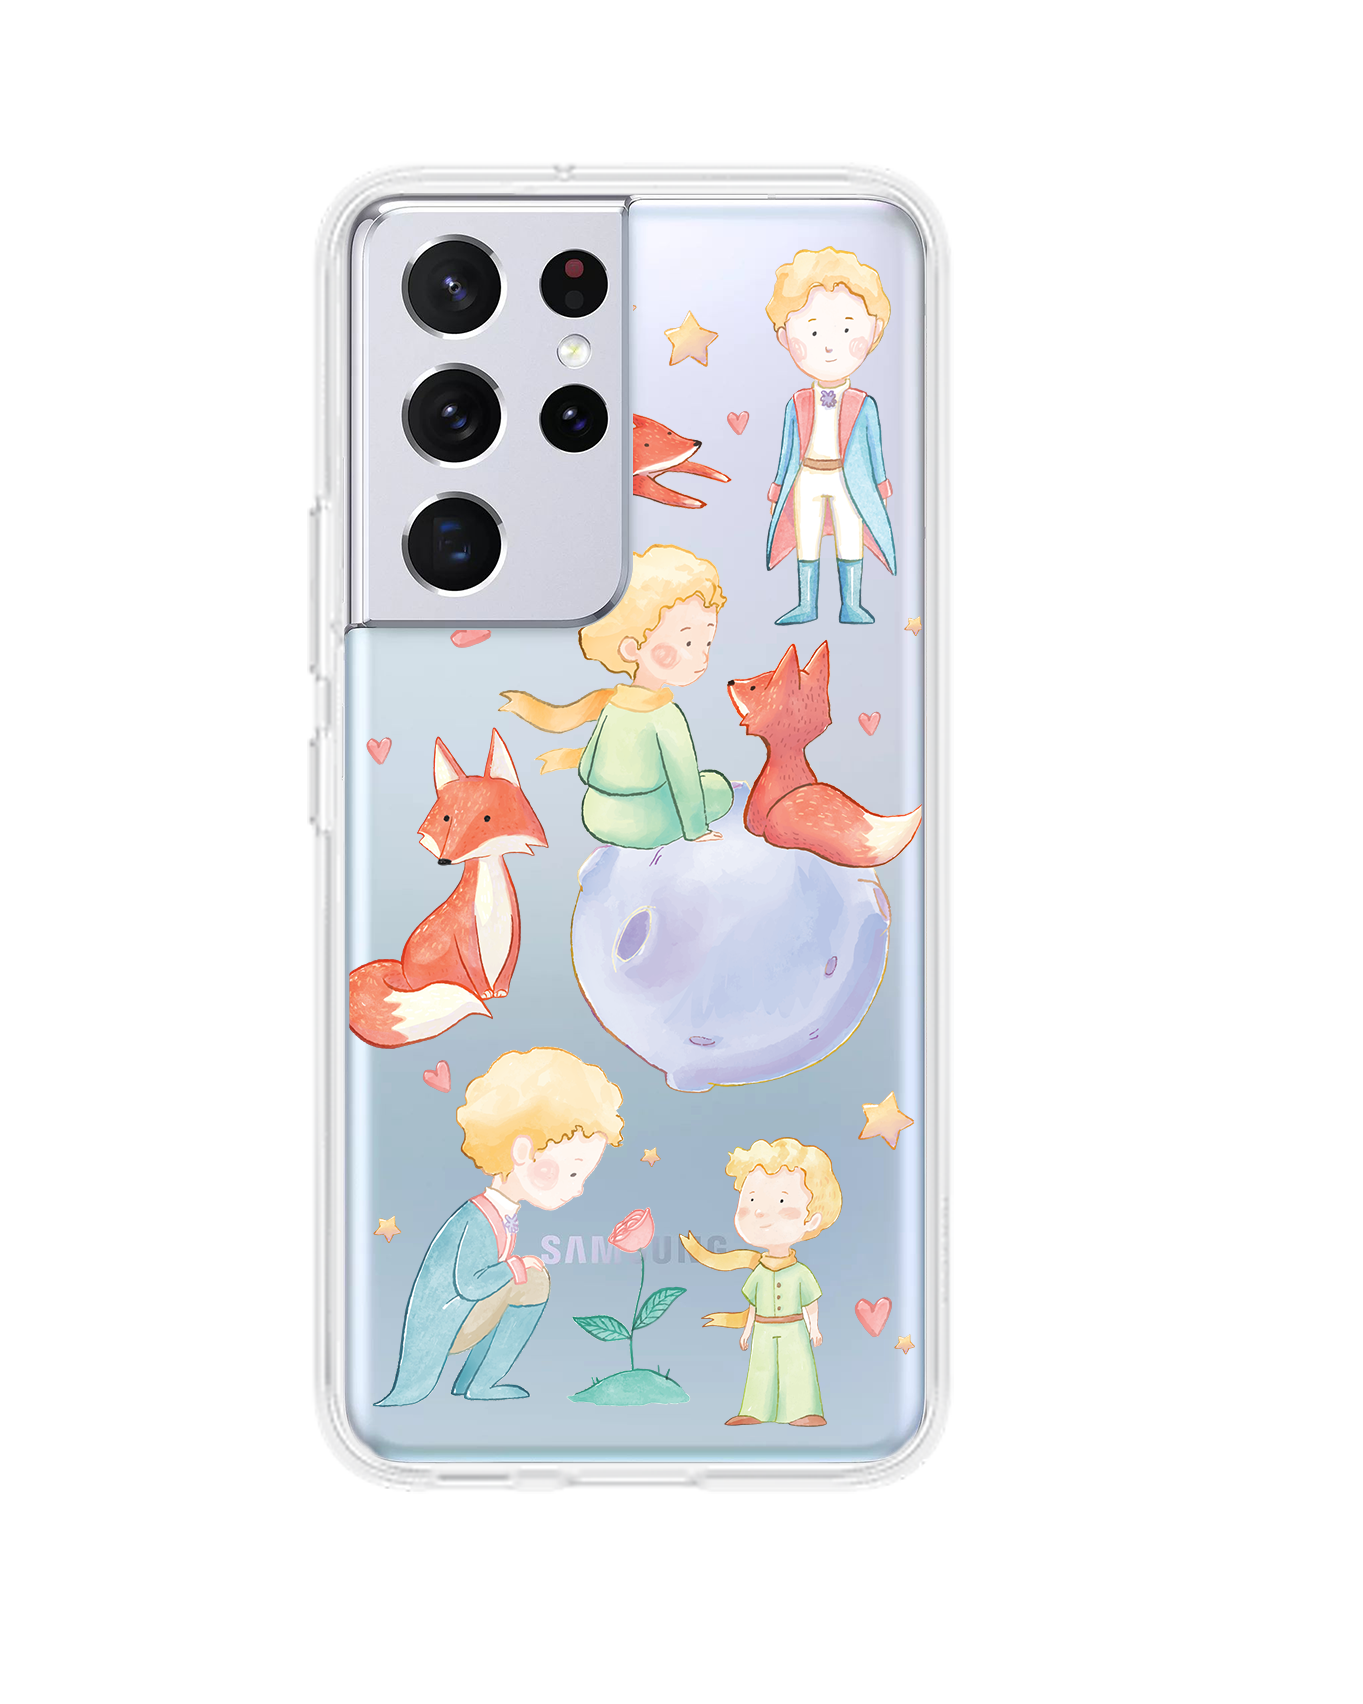 Android Rearguard Hybrid Case - Little Prince & Fox